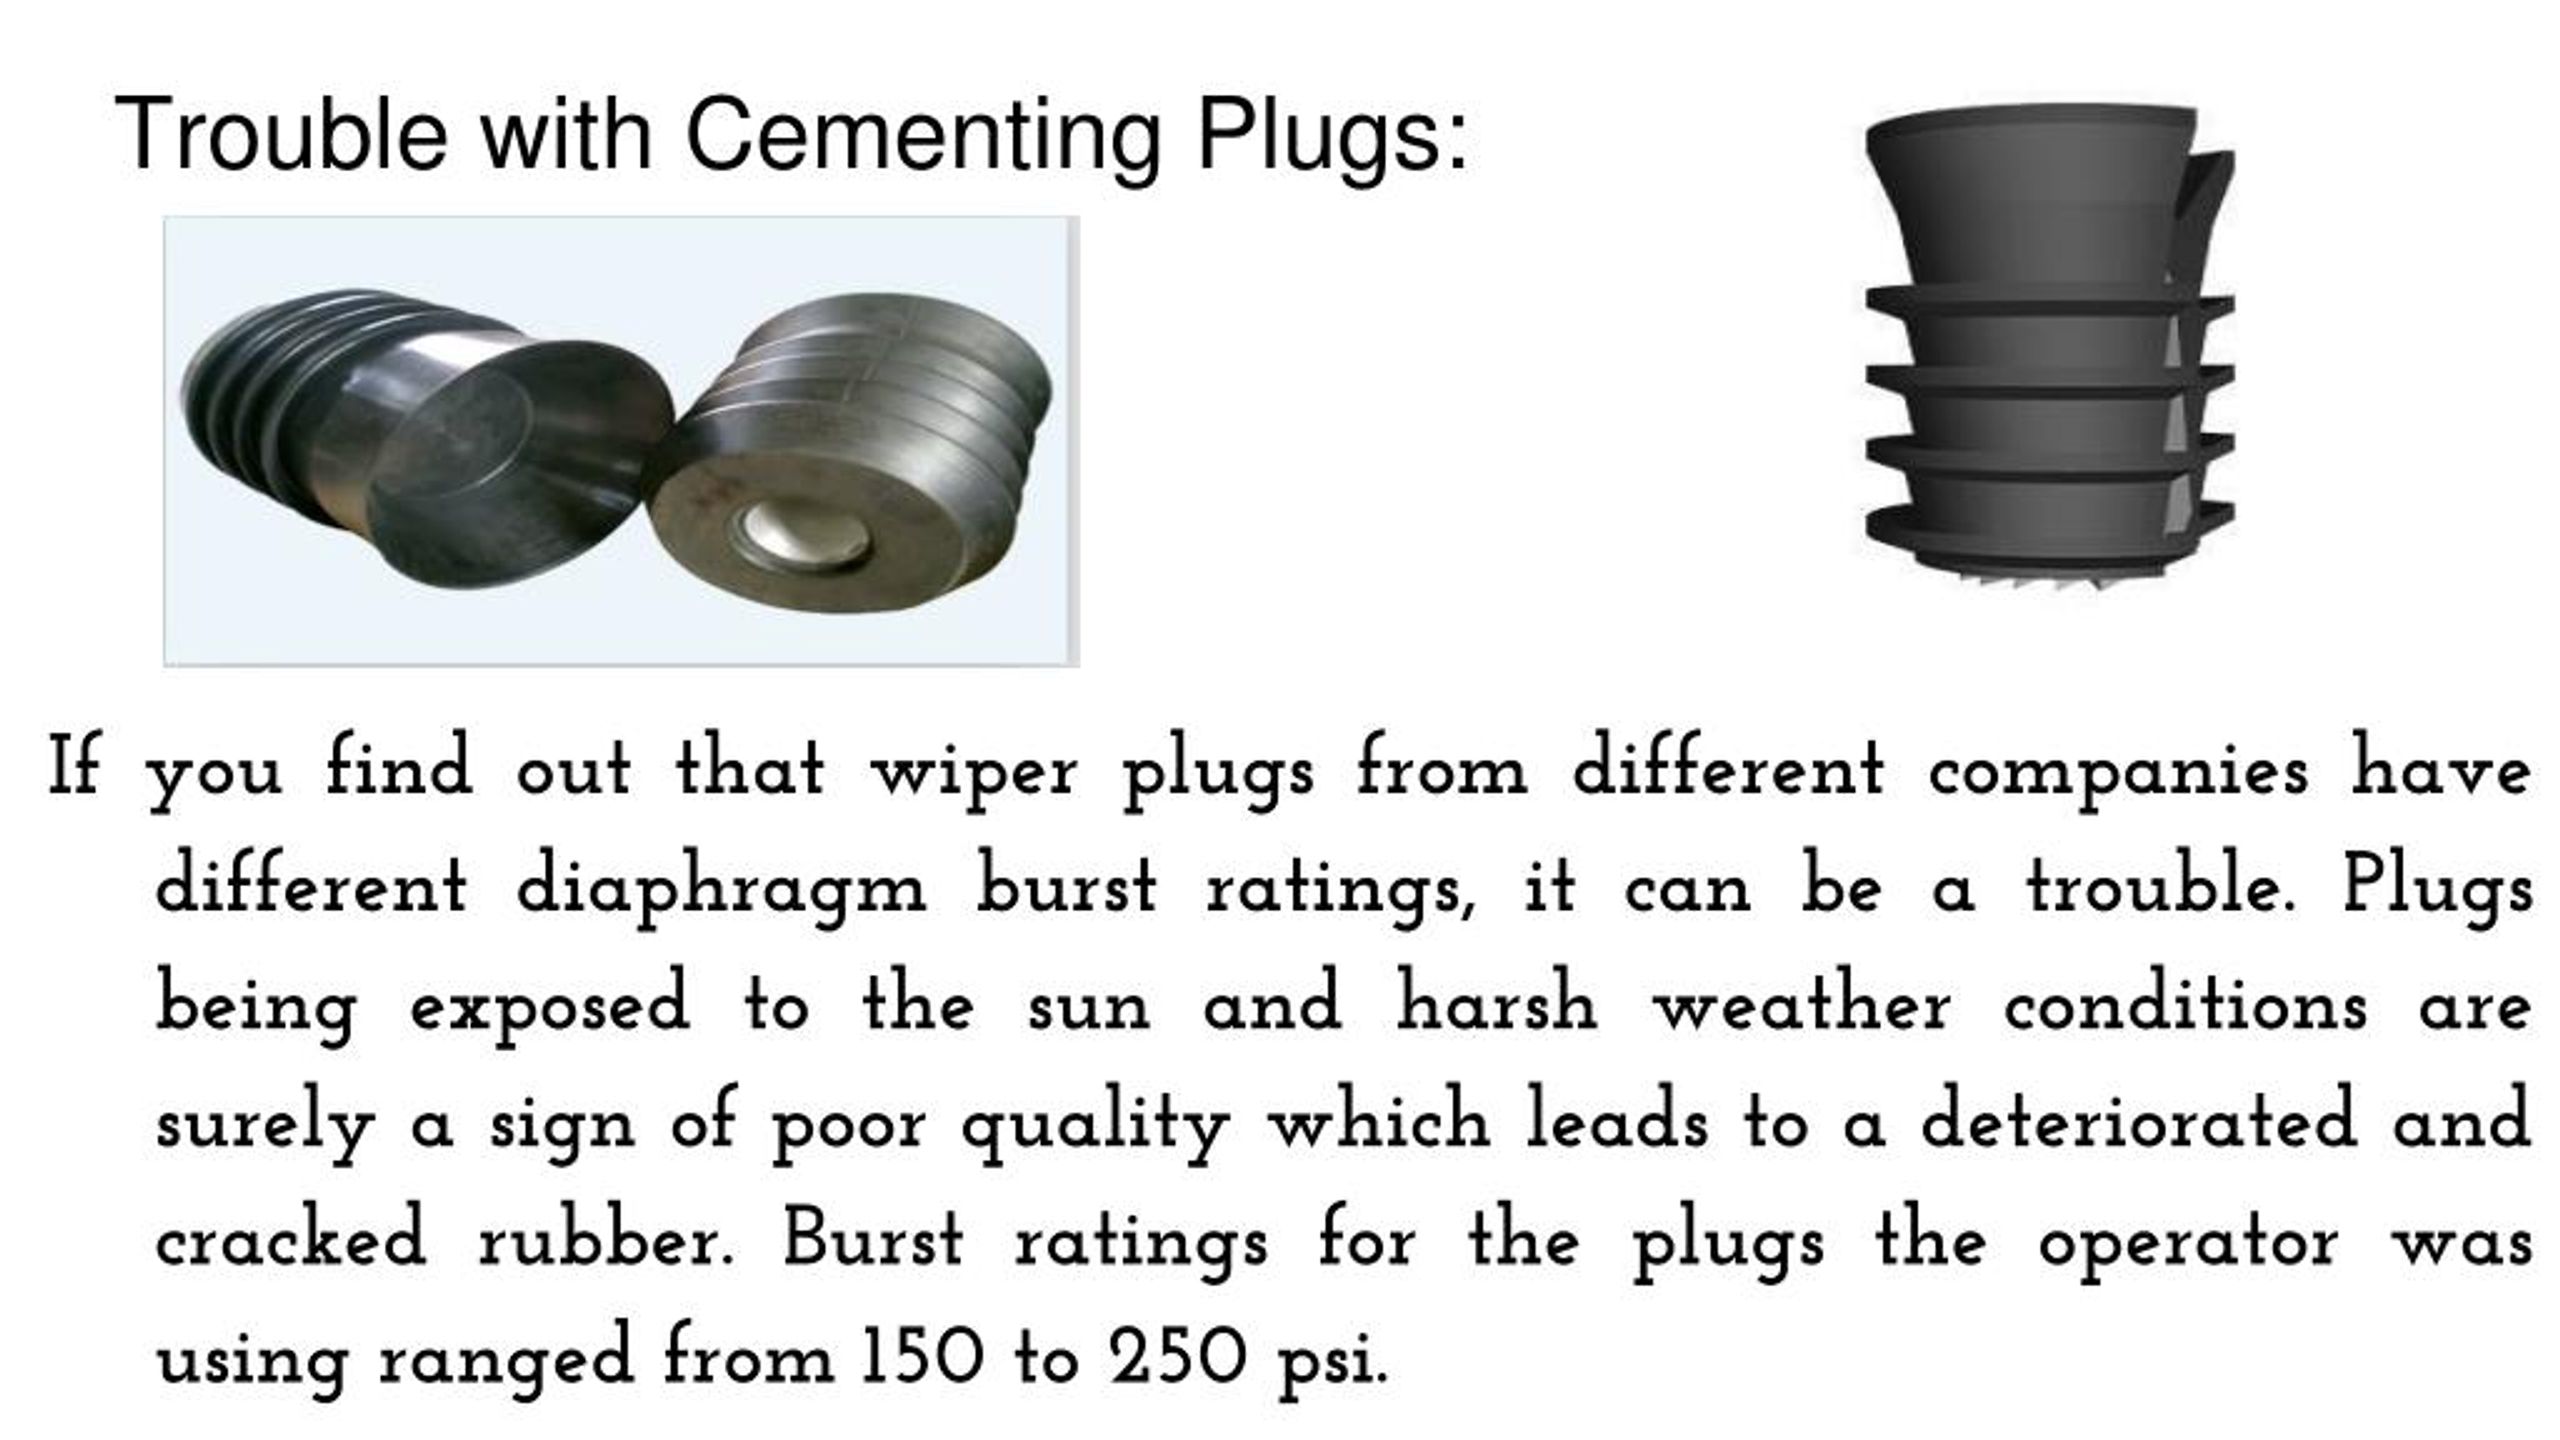 PPT - The Amazing Benefits of Cementing Plugs PowerPoint Presentation